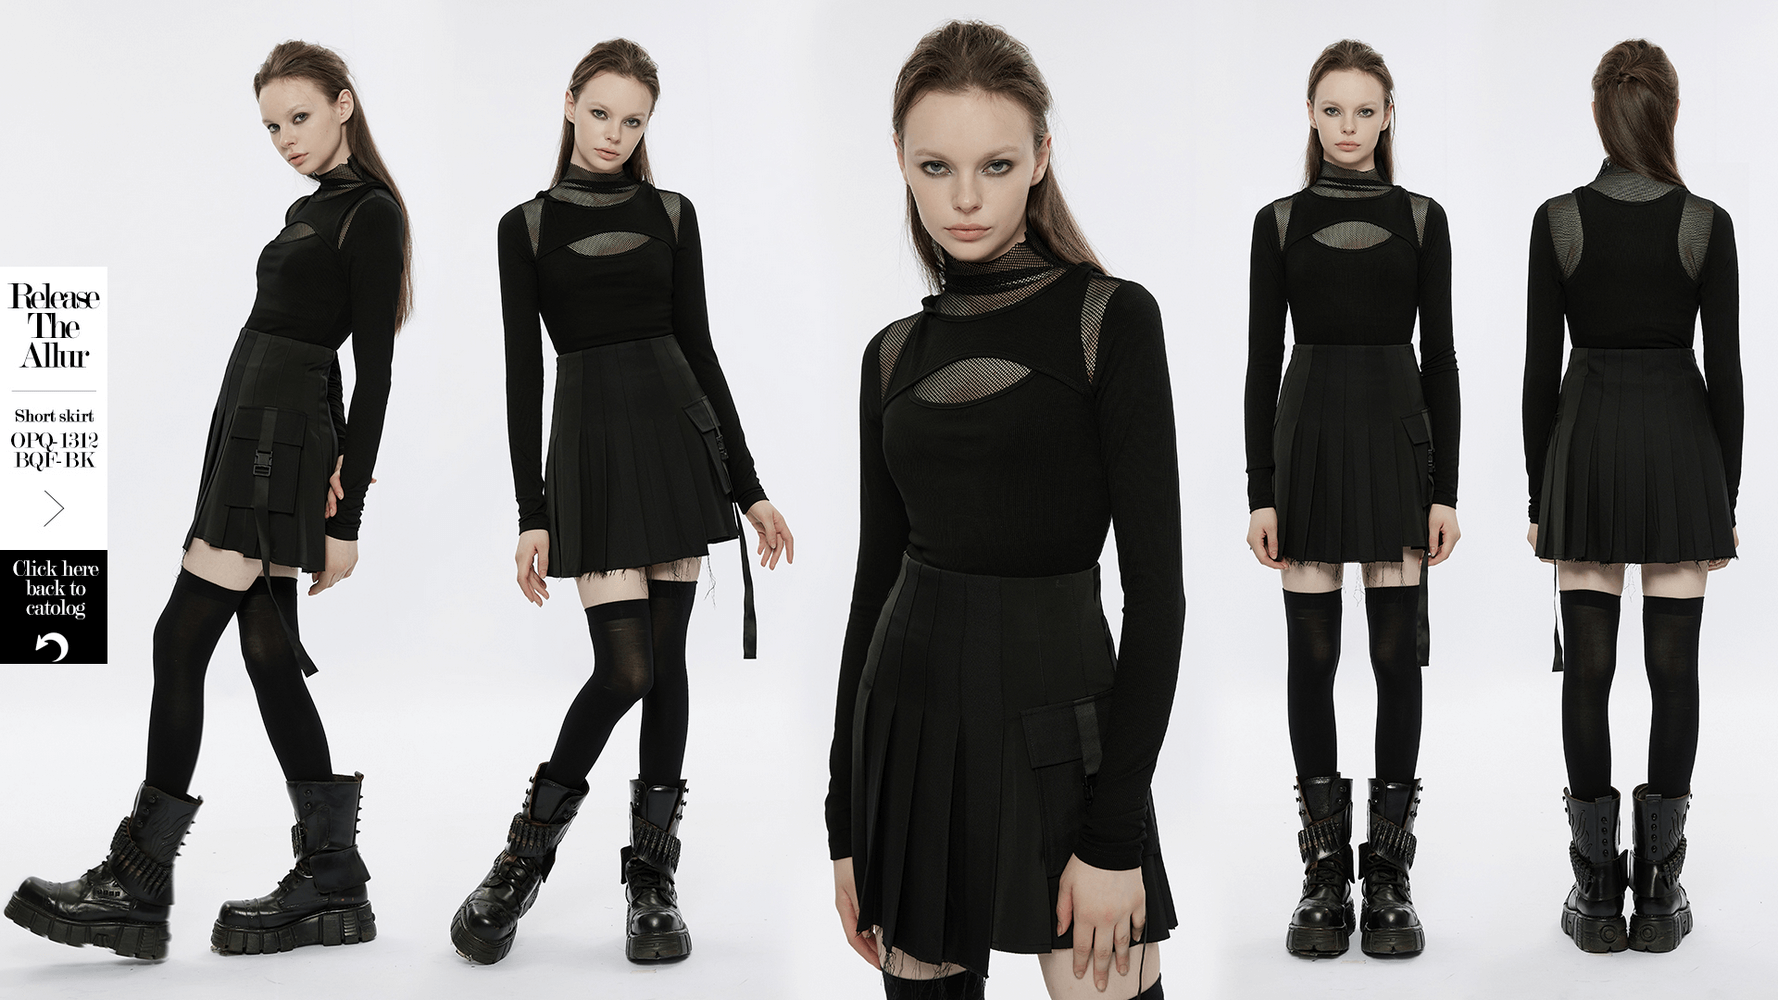 Elastic Fit Black Top with Hollow Gauze Design